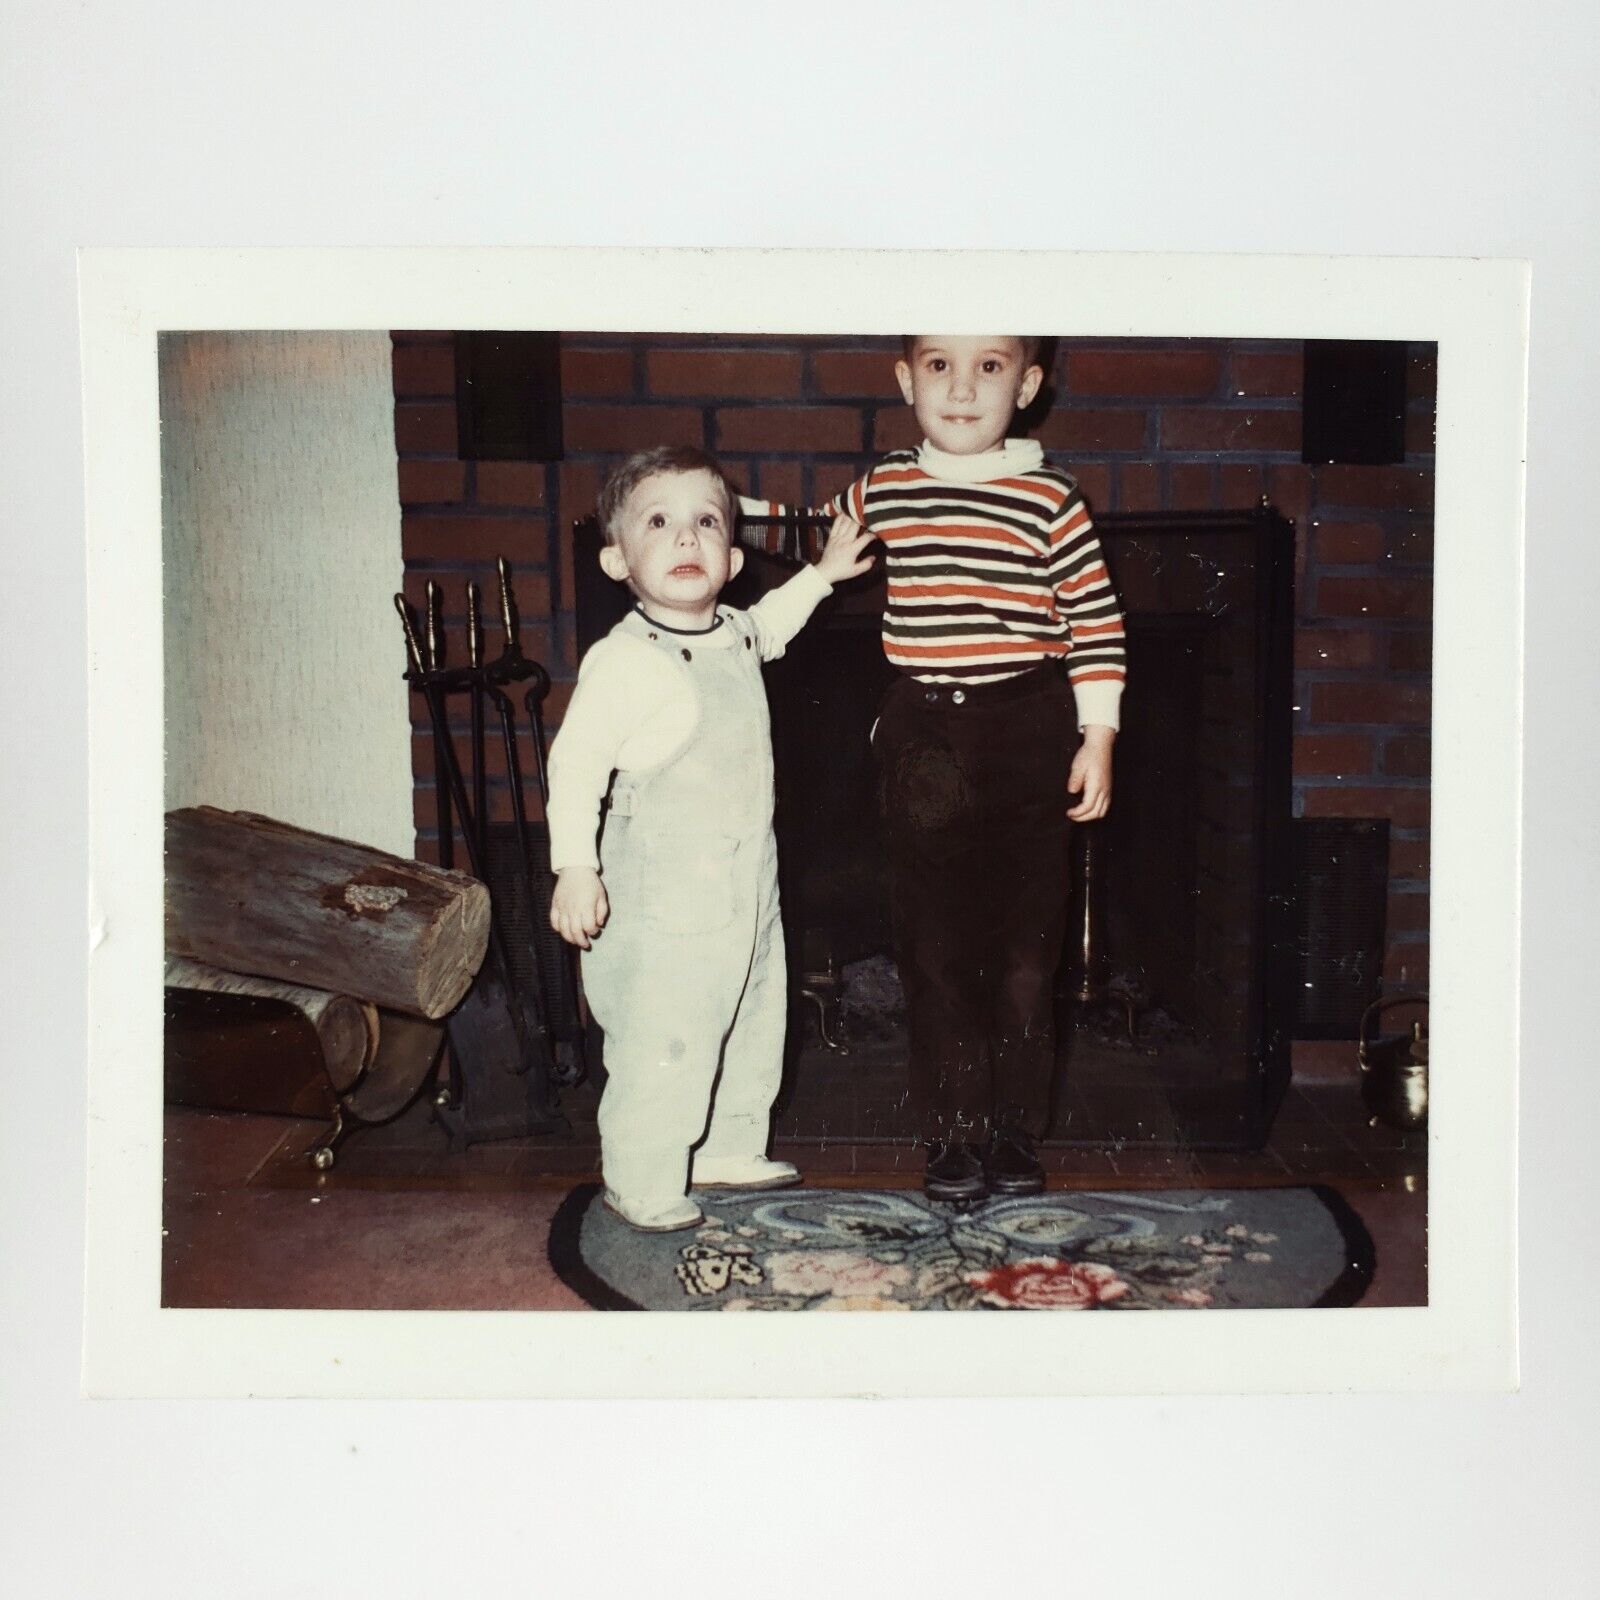 Seeing Something Scary Photo 1990s Brothers Fireplace Vintage Snapshot Art D1874